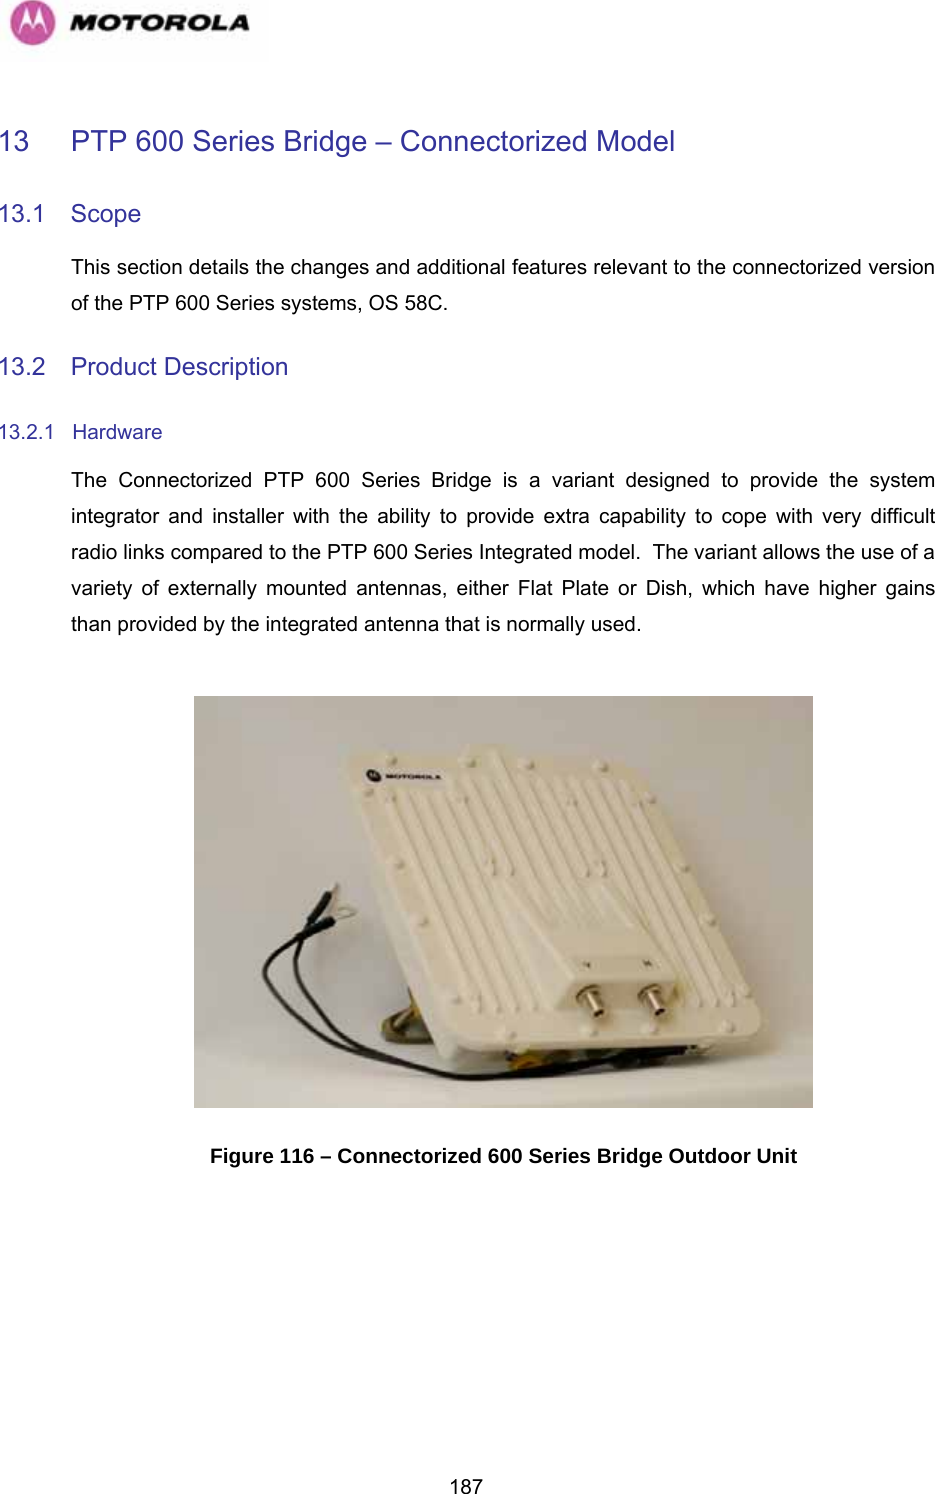   18713  PTP 600 Series Bridge – Connectorized Model 13.1 Scope This section details the changes and additional features relevant to the connectorized version of the PTP 600 Series systems, OS 58C. 13.2 Product Description 13.2.1 Hardware The Connectorized PTP 600 Series Bridge is a variant designed to provide the system integrator and installer with the ability to provide extra capability to cope with very difficult radio links compared to the PTP 600 Series Integrated model.  The variant allows the use of a variety of externally mounted antennas, either Flat Plate or Dish, which have higher gains than provided by the integrated antenna that is normally used.   Figure 116 – Connectorized 600 Series Bridge Outdoor Unit  